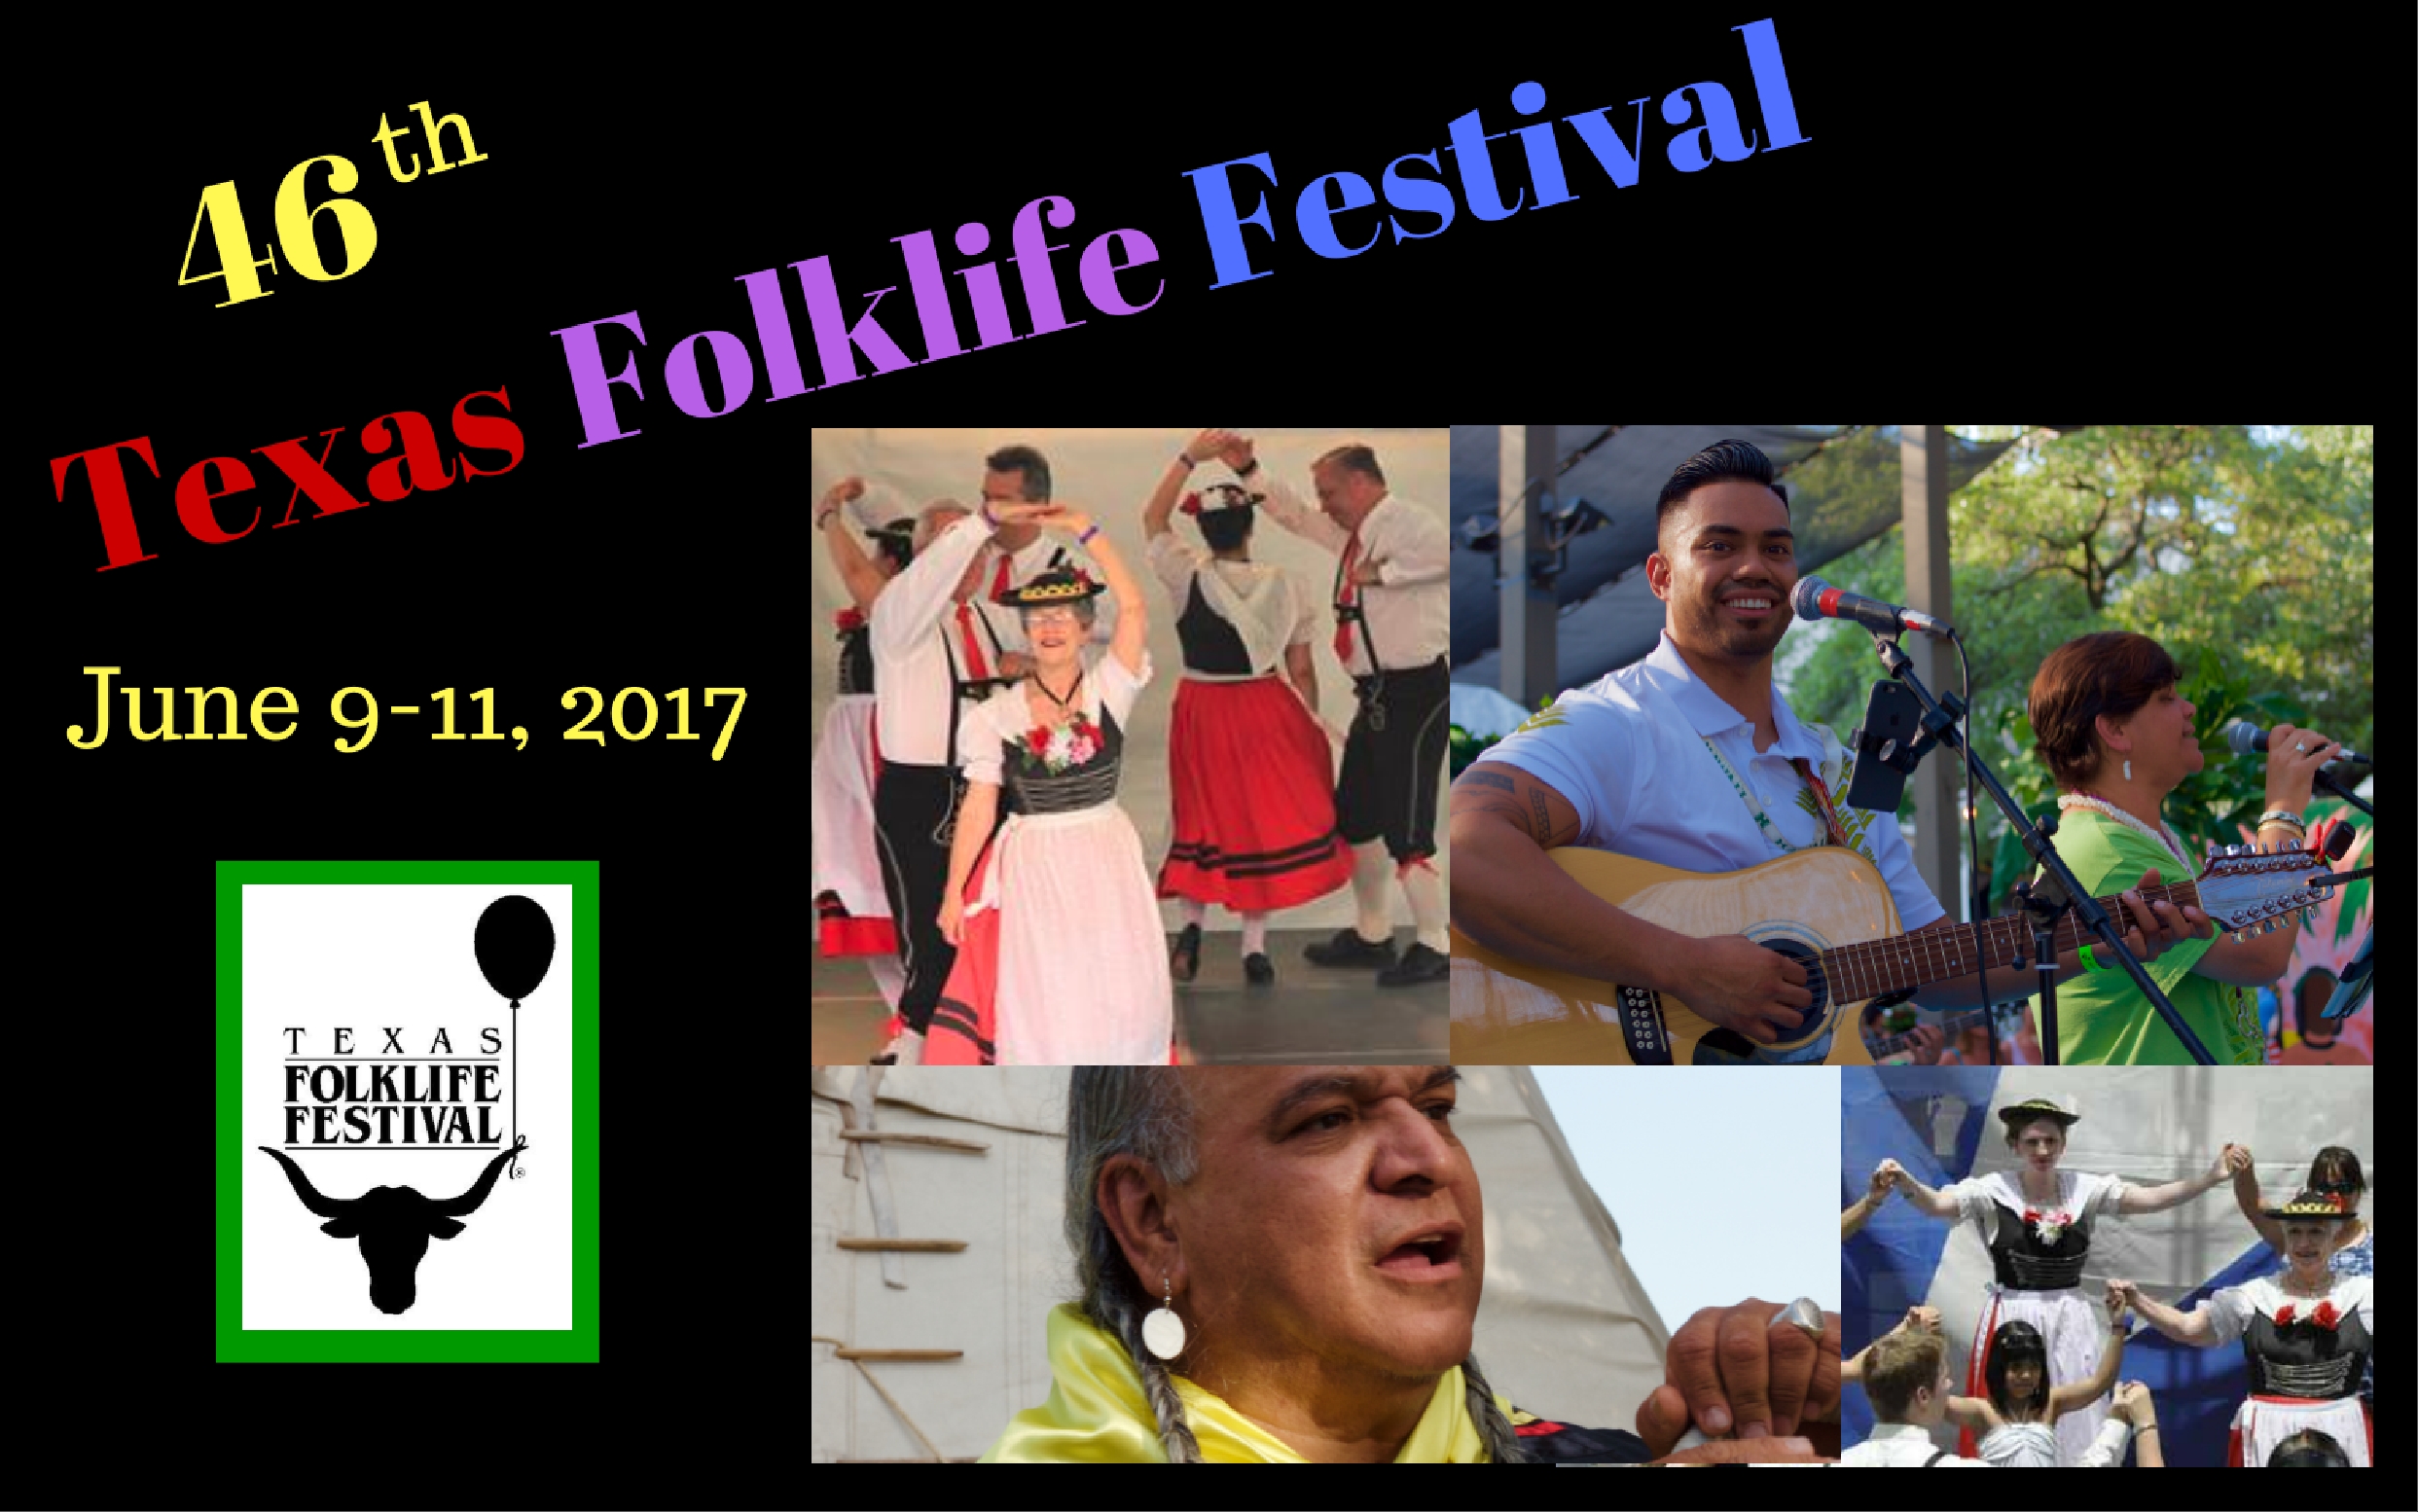 Wrap Up Your Year with the Texas Folklife Festival! Discover Texas